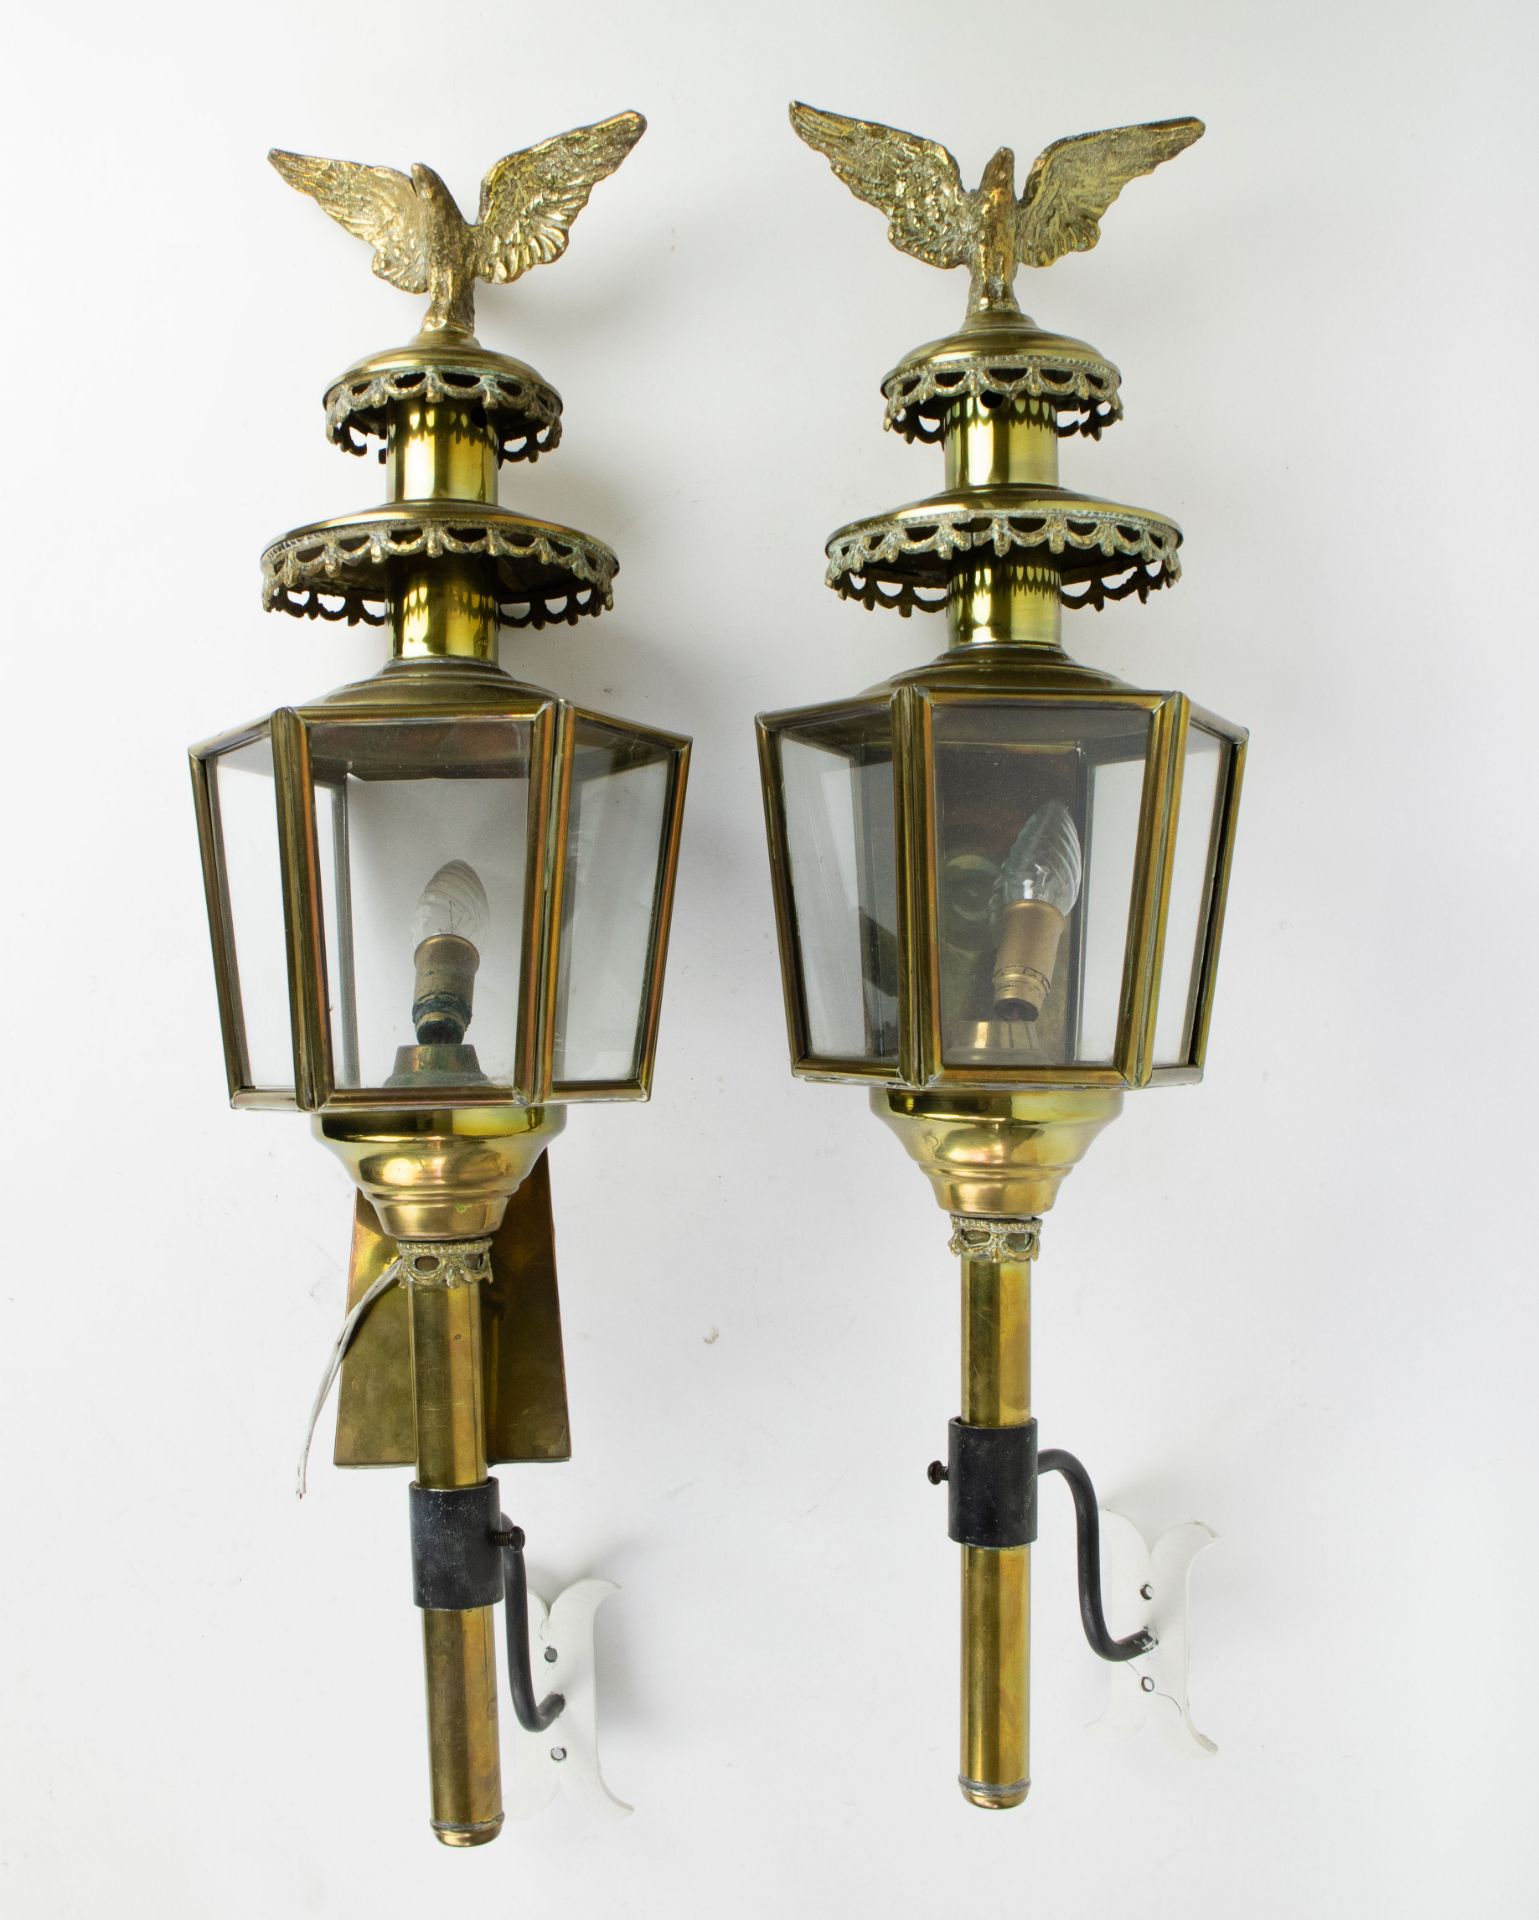 2 carriage lanterns and a 17thC candle stick transformed into a lamp - Image 2 of 5